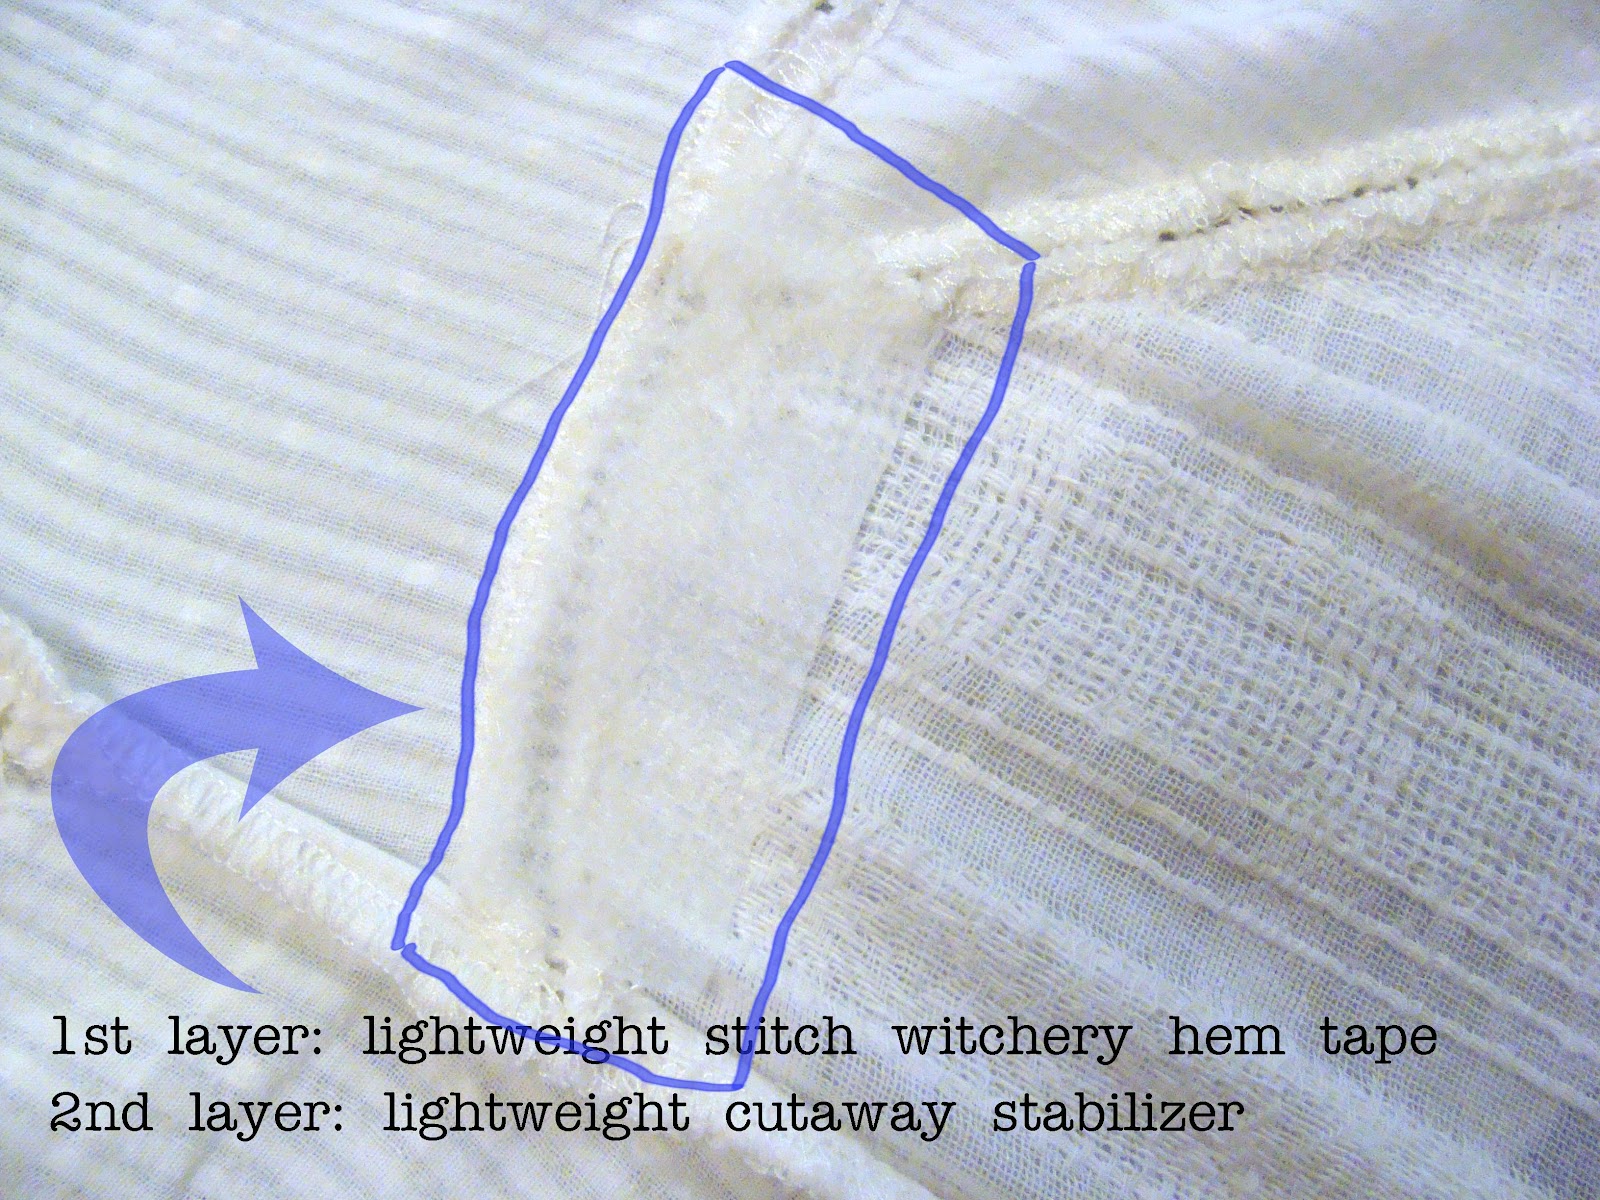 How do you remove Stitch Witchery from fabric?